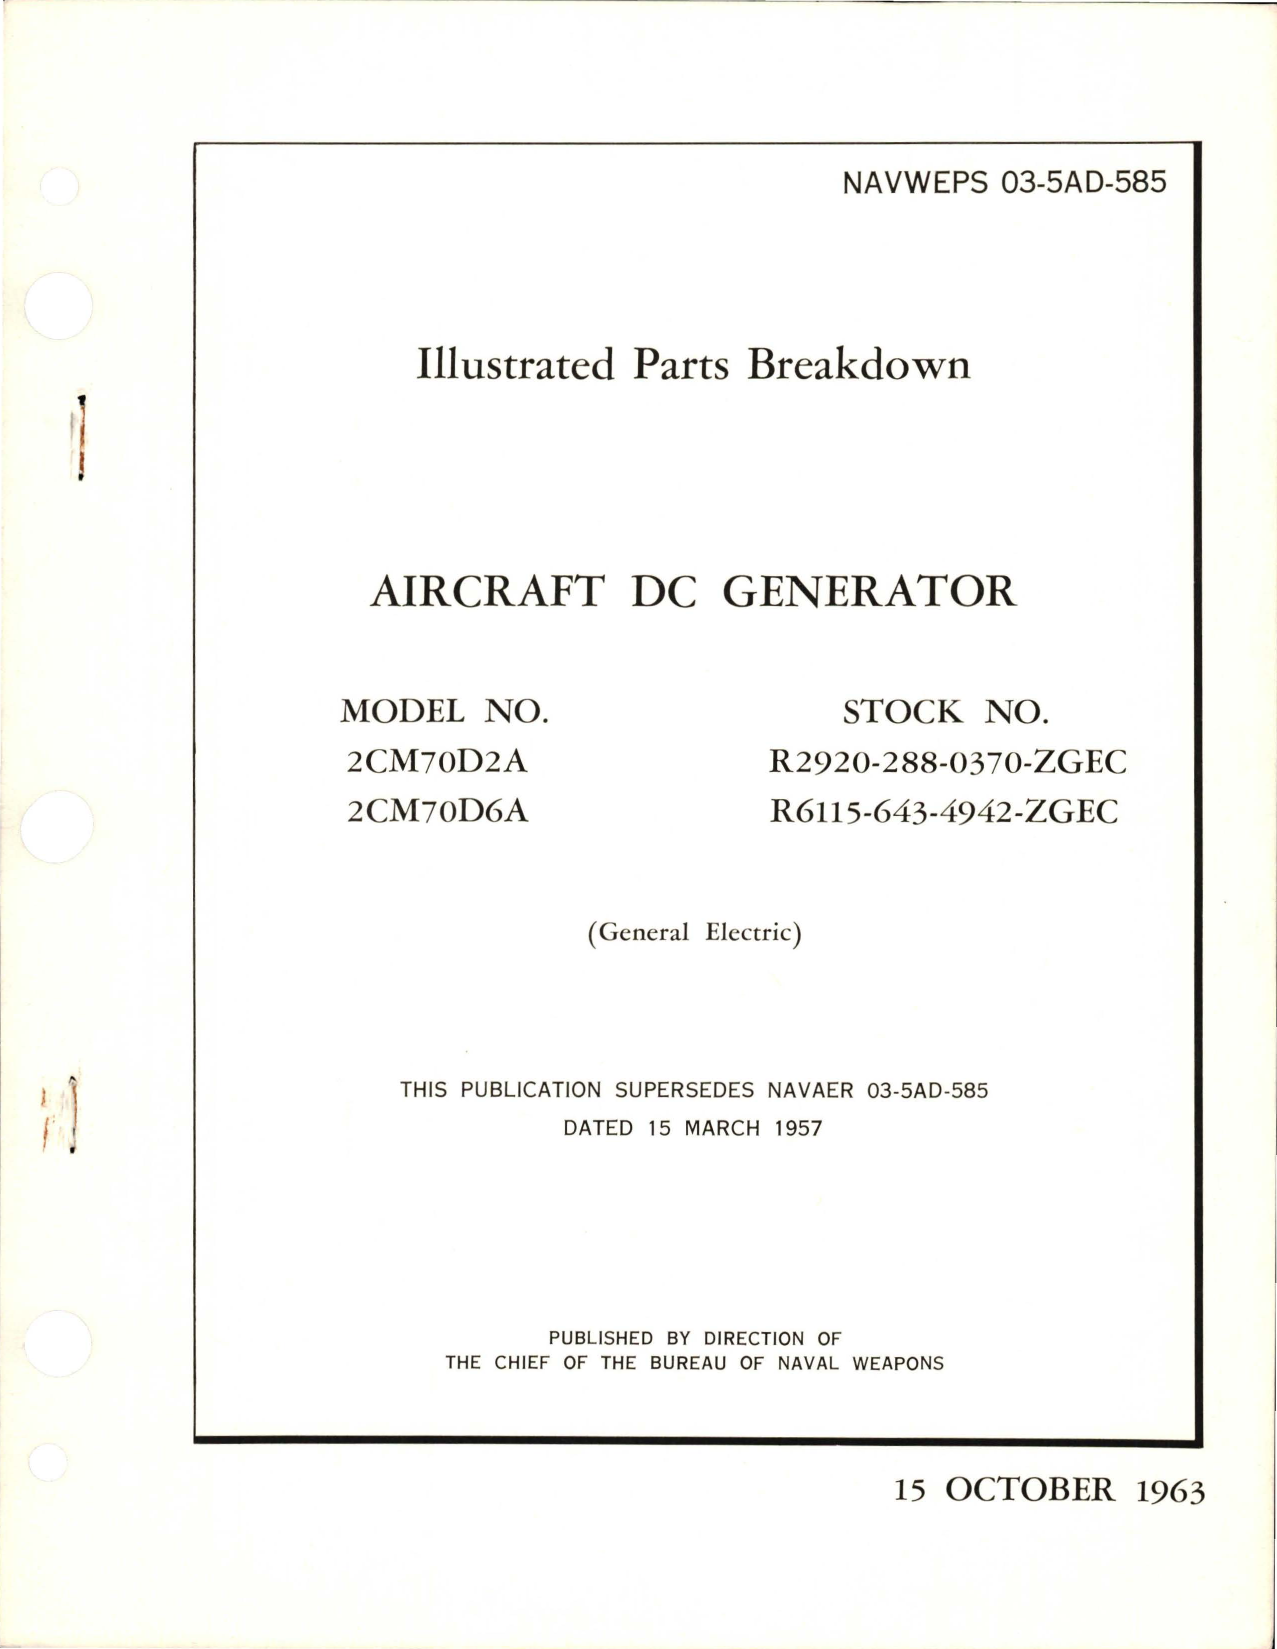 Sample page 1 from AirCorps Library document: Illustrated Parts Breakdown for DC Generator - Models 2CM70D2A, 2CM70D6A